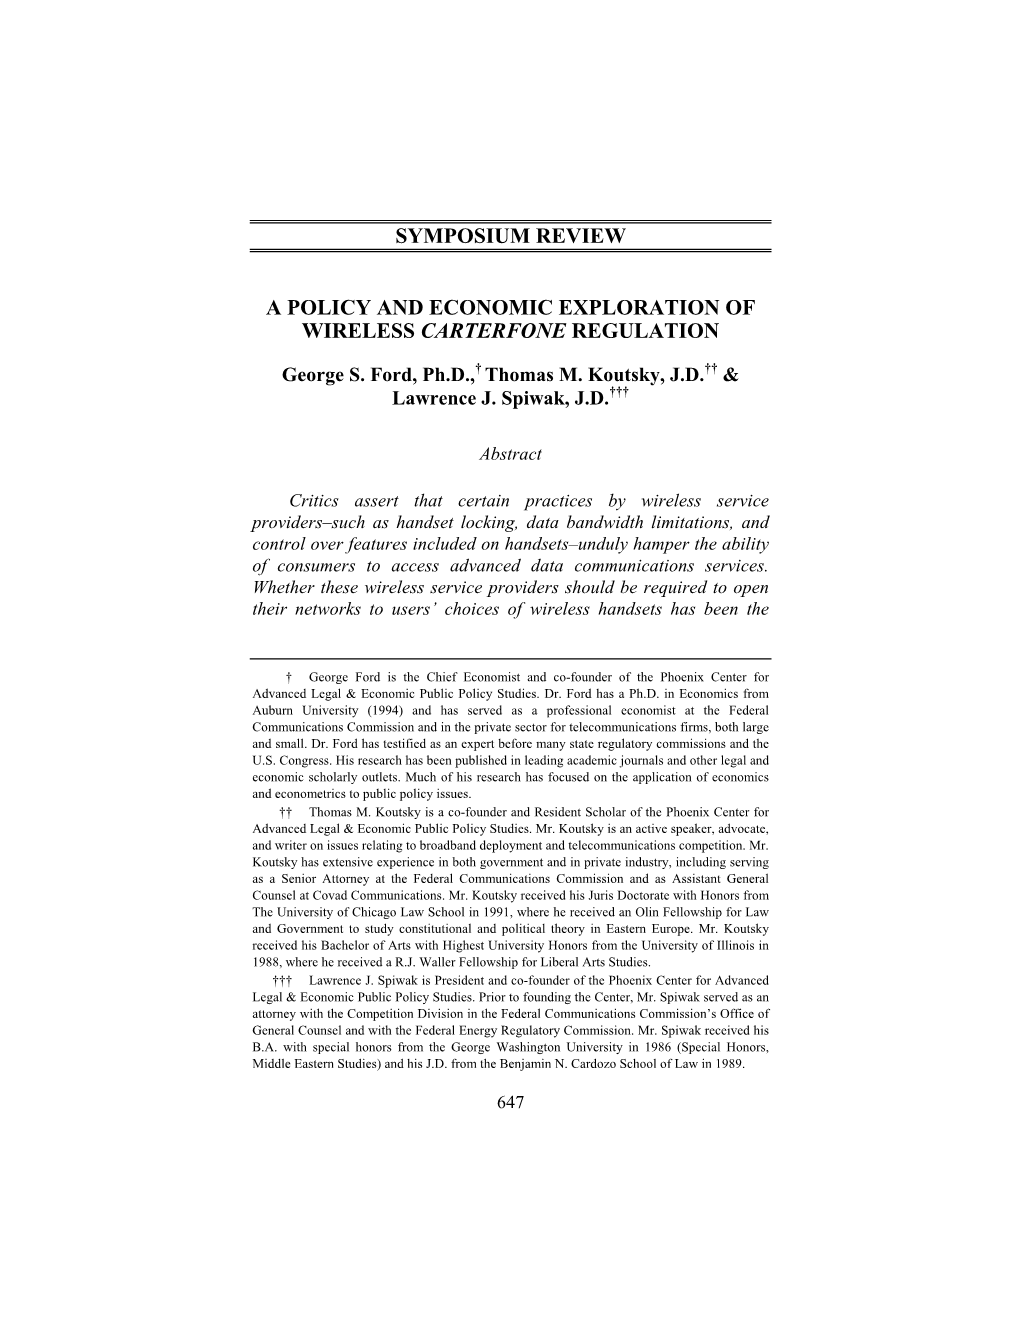 A Policy and Economic Exploration of Wireless Carterfone Regulation